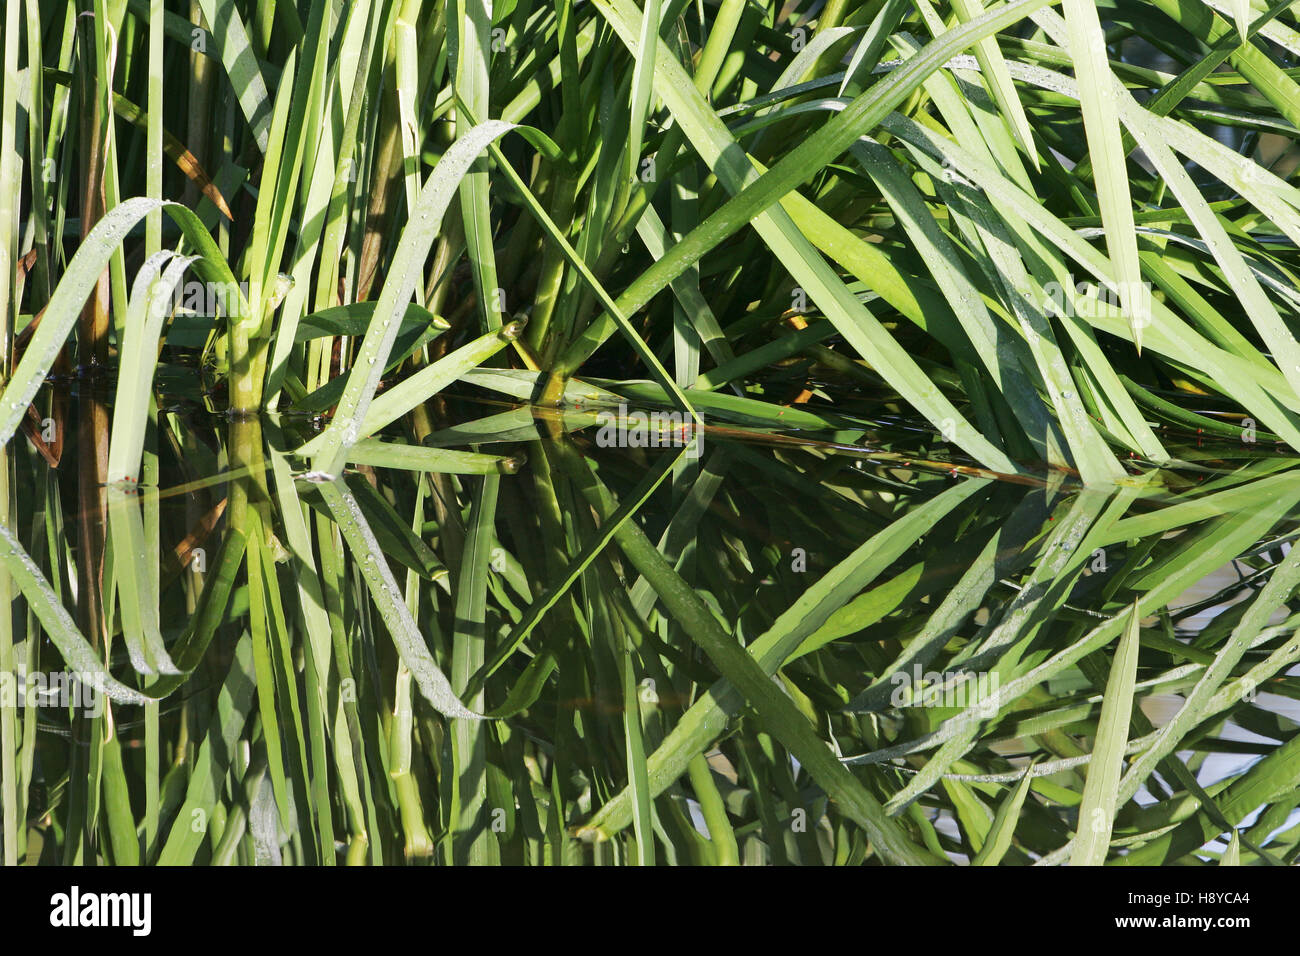 Reed canary-grass Phalaris arundinacea leaves reflected in the River Avon Hampshire Hatches Ringwood Hampshire England UK October 2012 Stock Photo